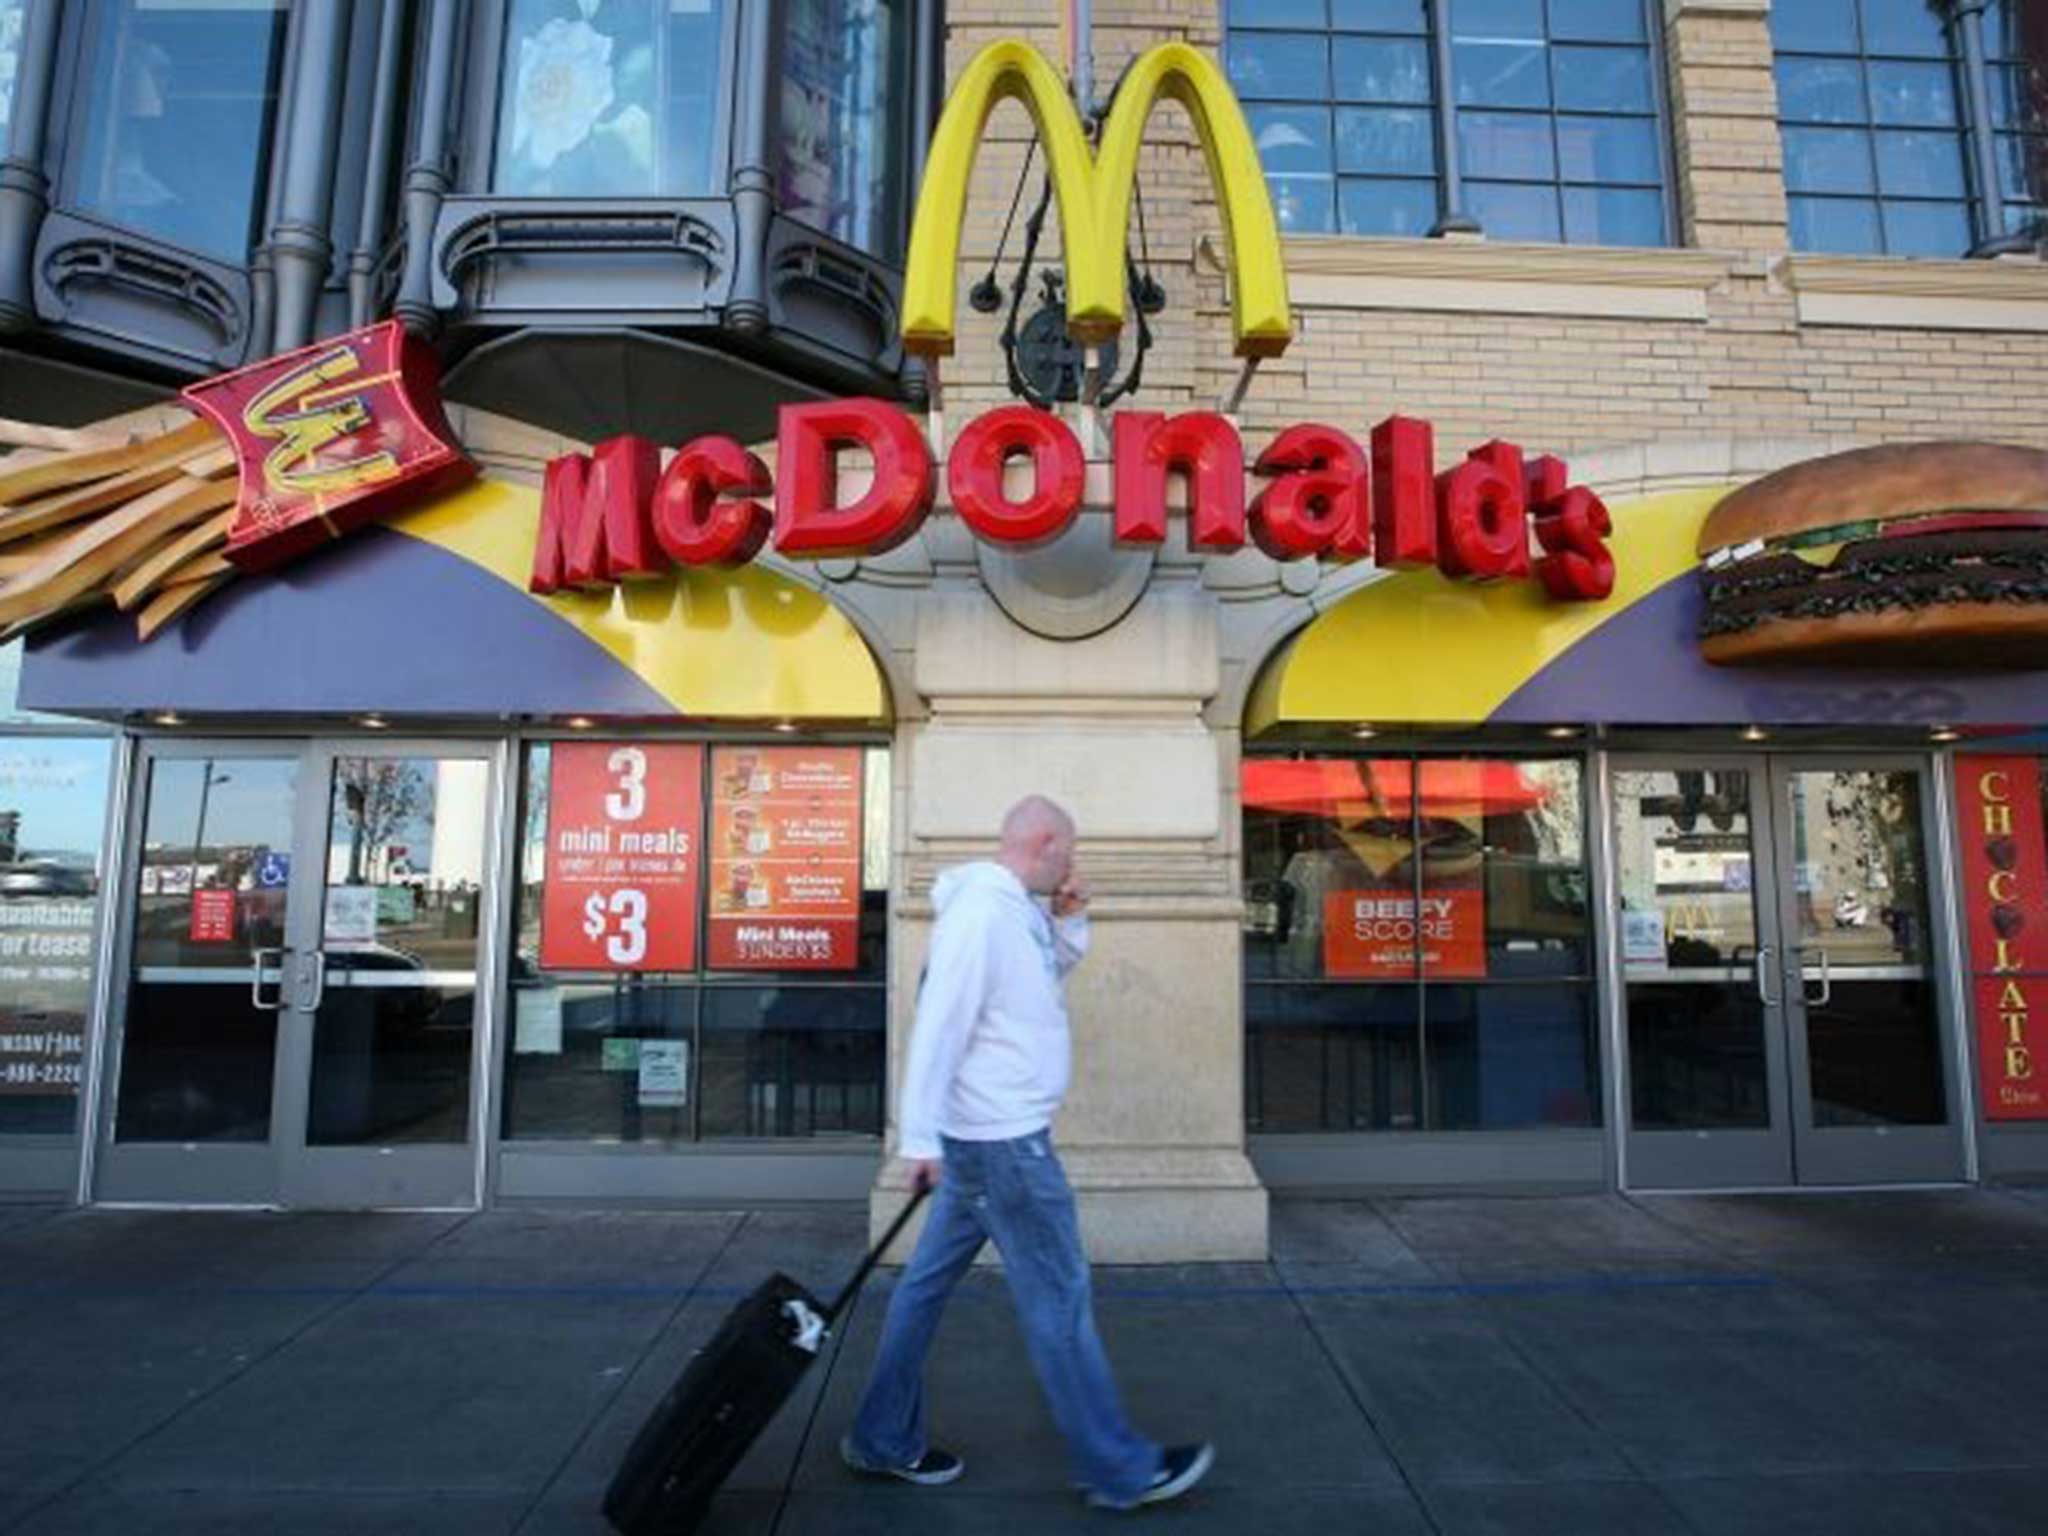 It’s not that usual for McDonald’s to become a symbol of warming relations with the US